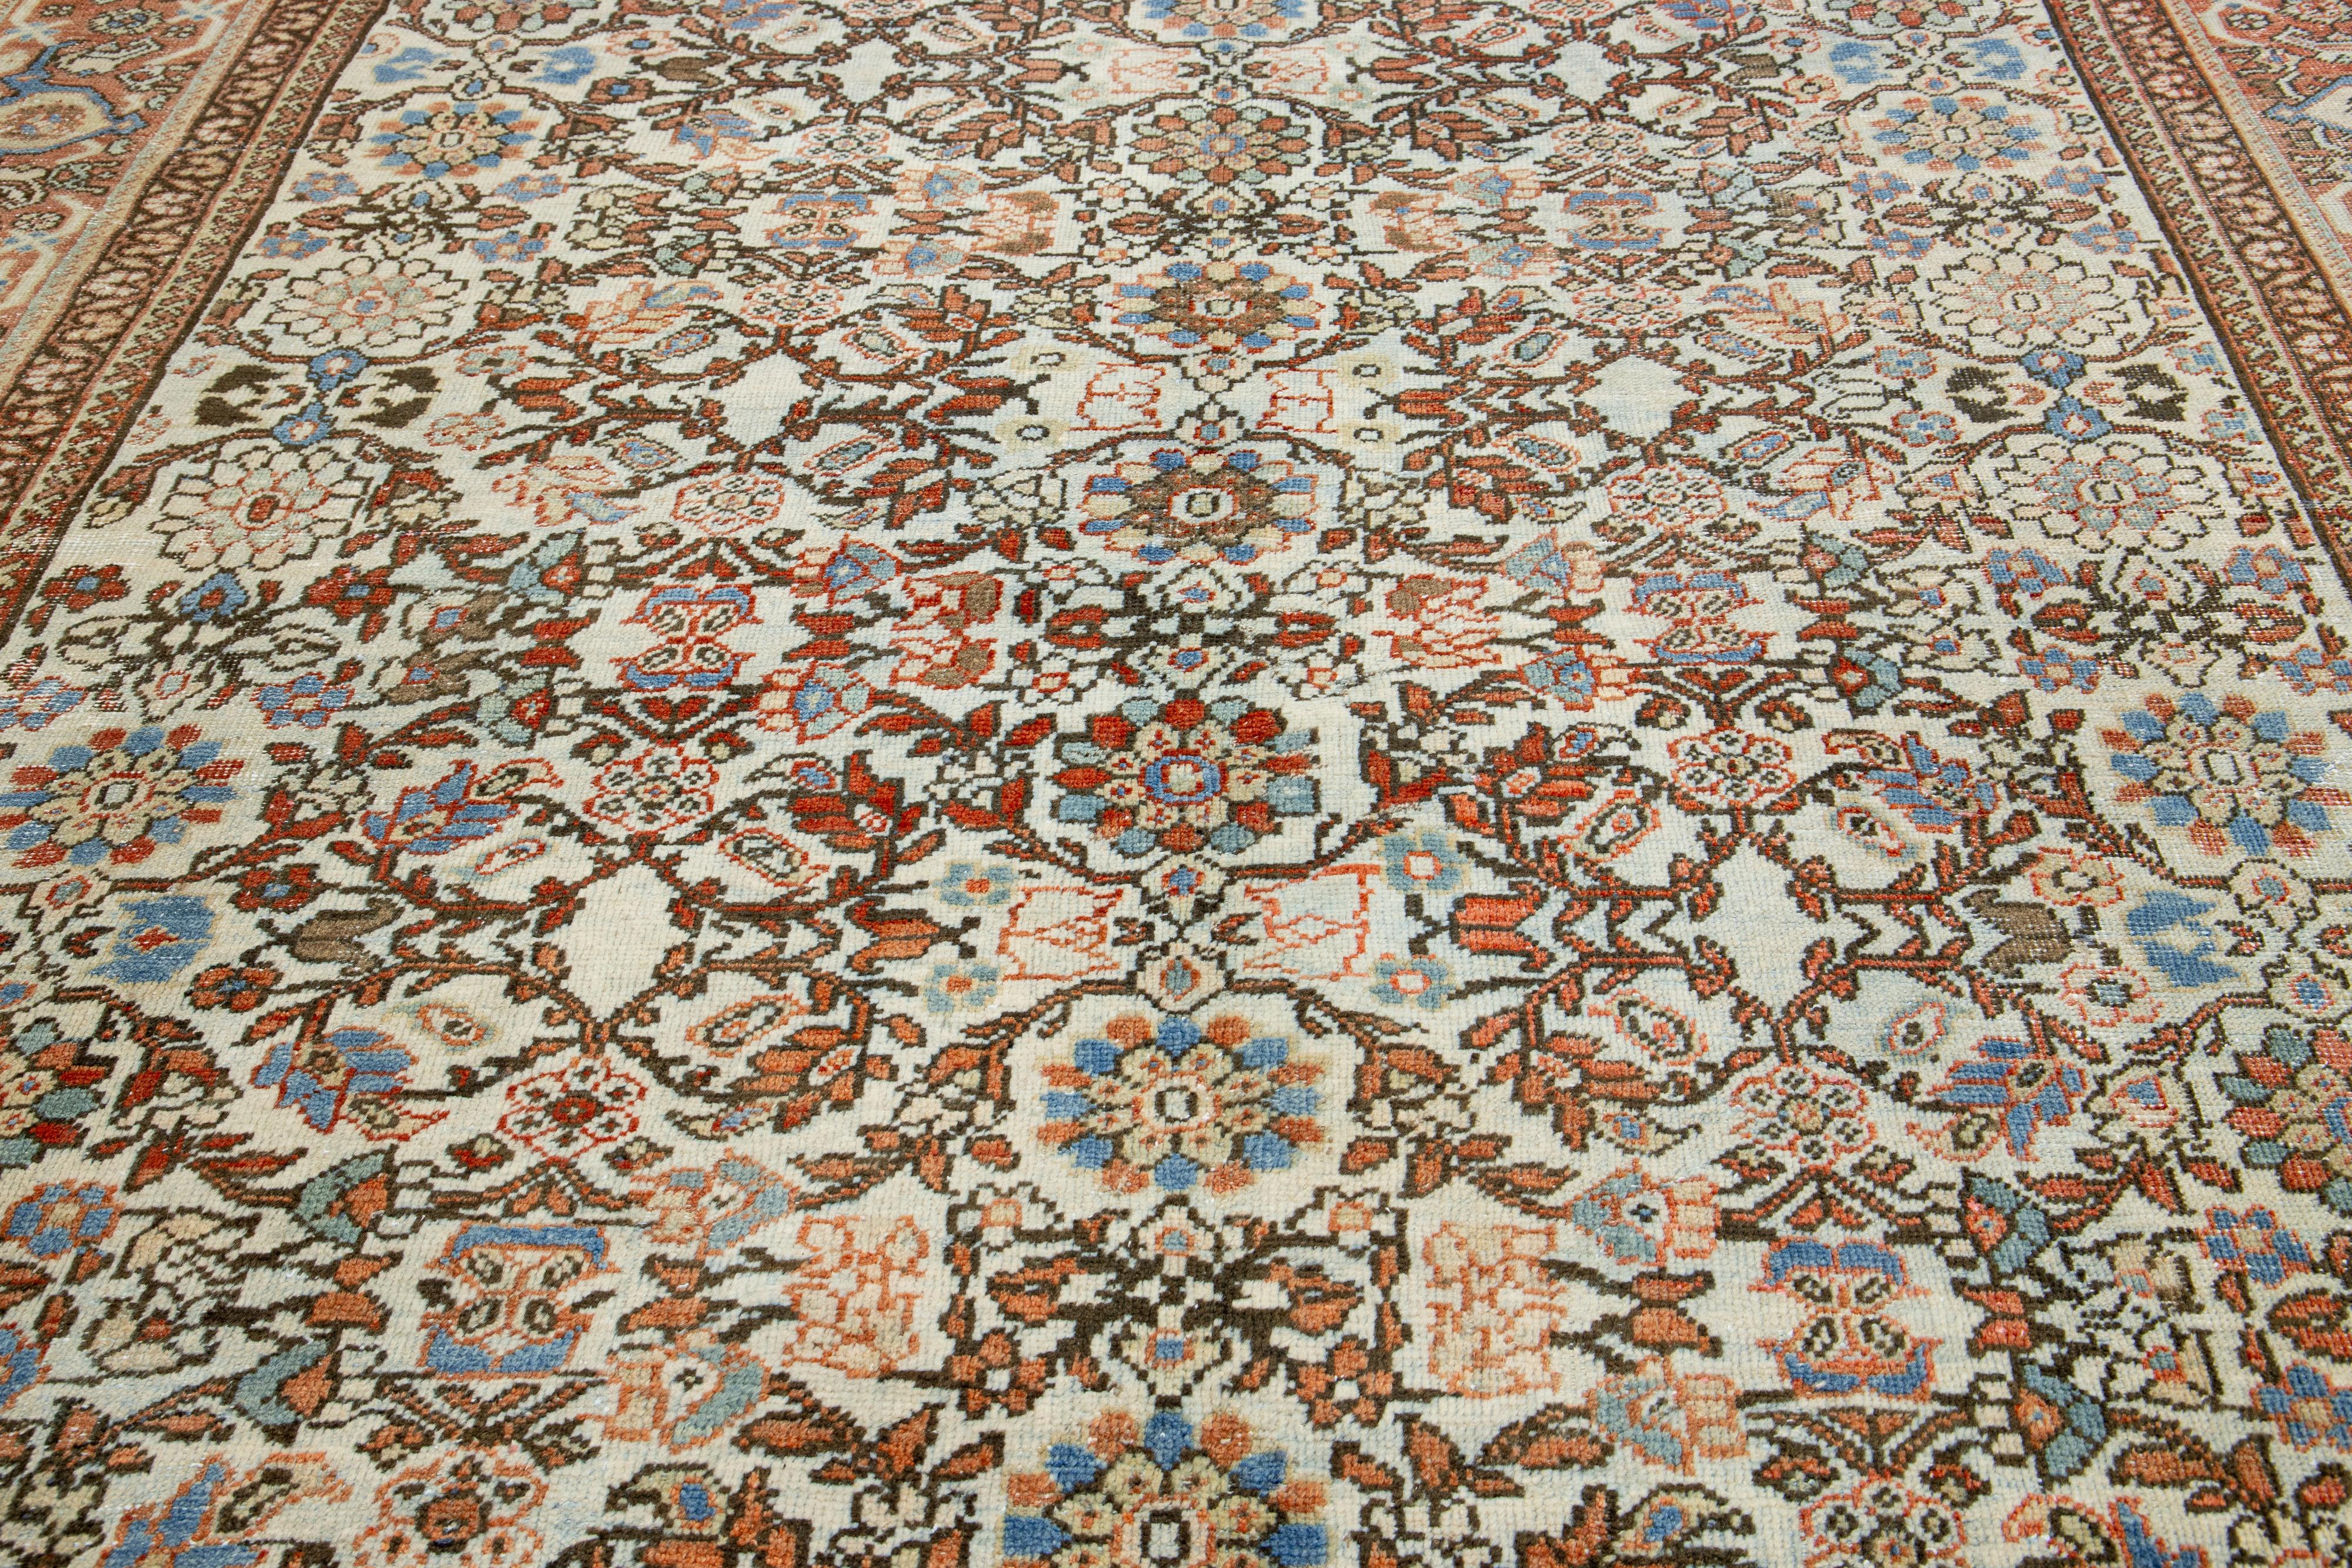 Handmade Multicolor Persian Mahal Designed Wool Rug From the 1910s For Sale 2